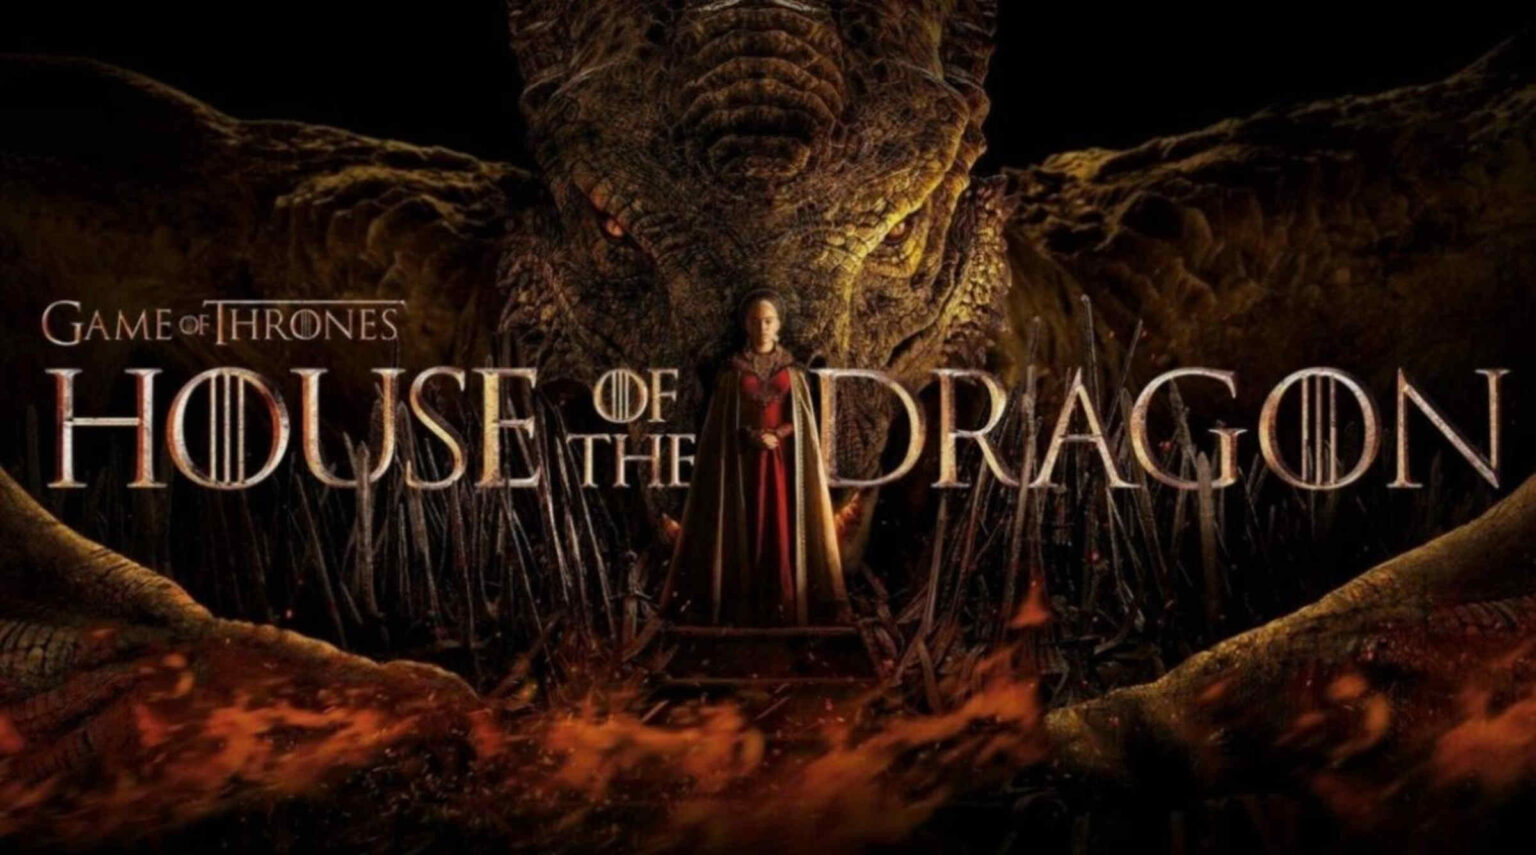 'House of the Dragon' is finally here. Find out how to stream anticipated HBO max TV show online for free.